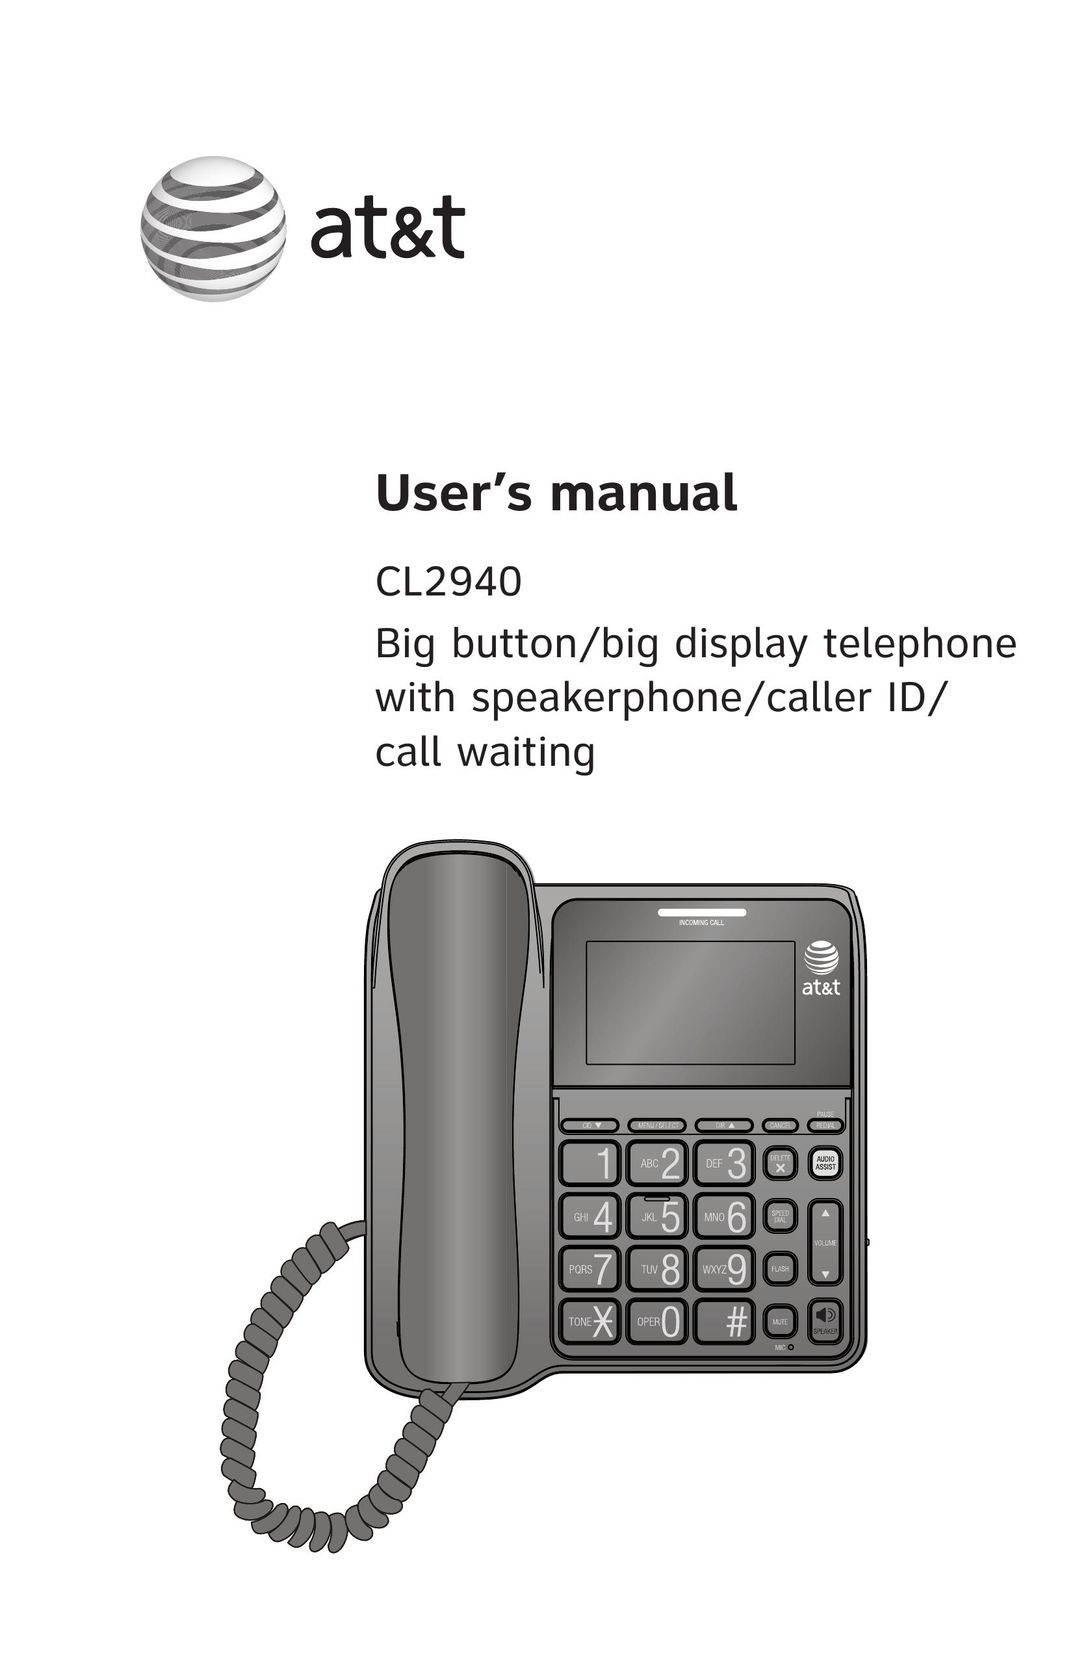 AT&T ATCL2940 Conference Phone User Manual